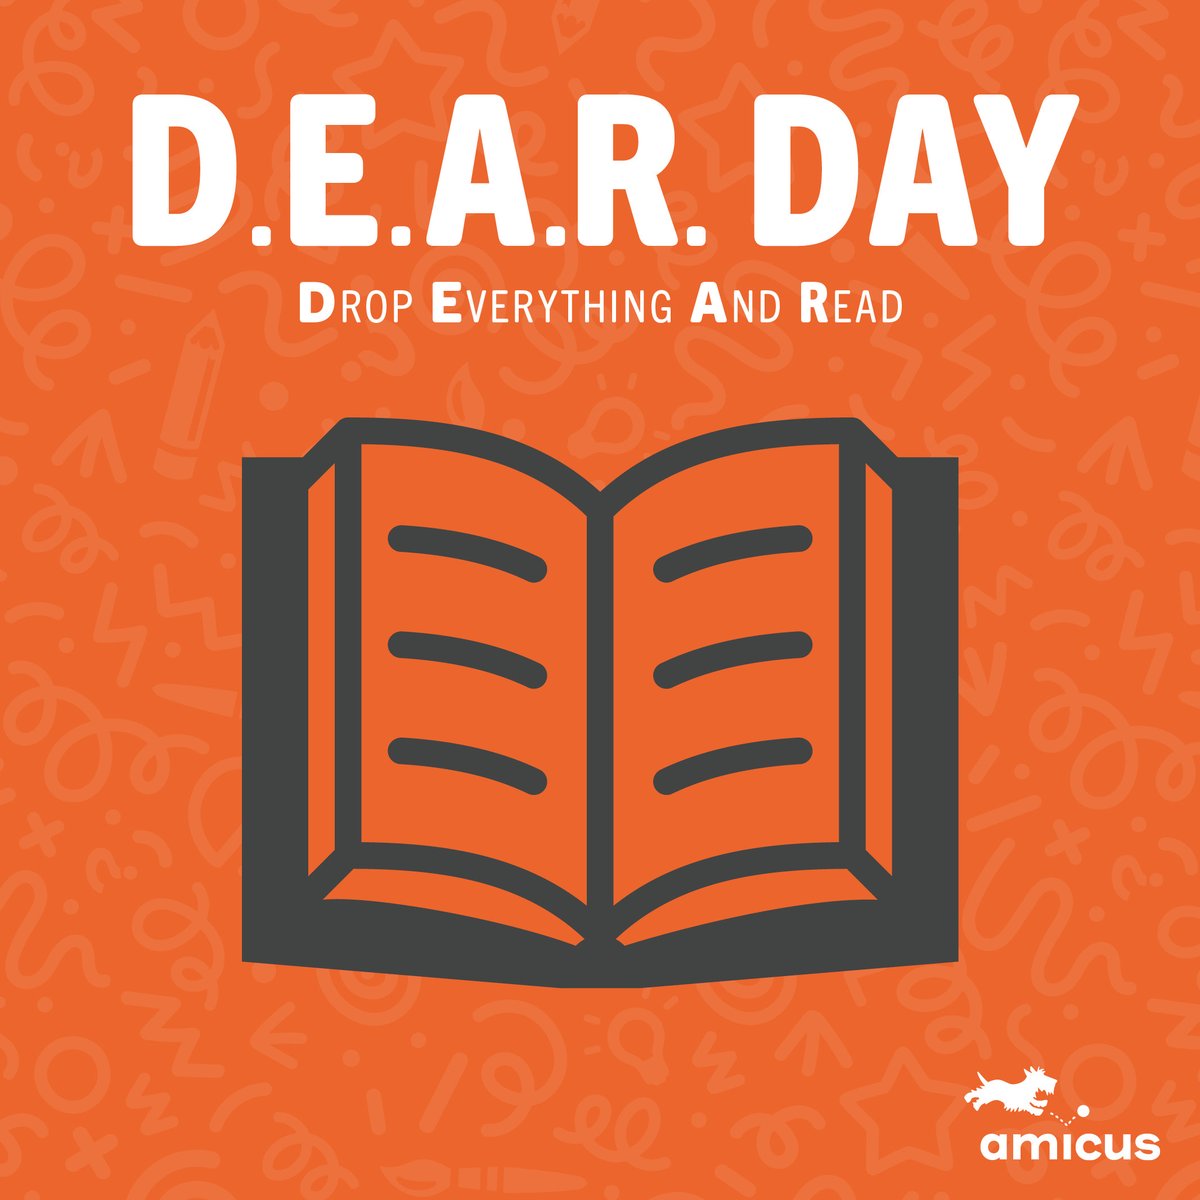 Happy #DEARday! What are you reading today? #dropeverythingandread #readtolearn